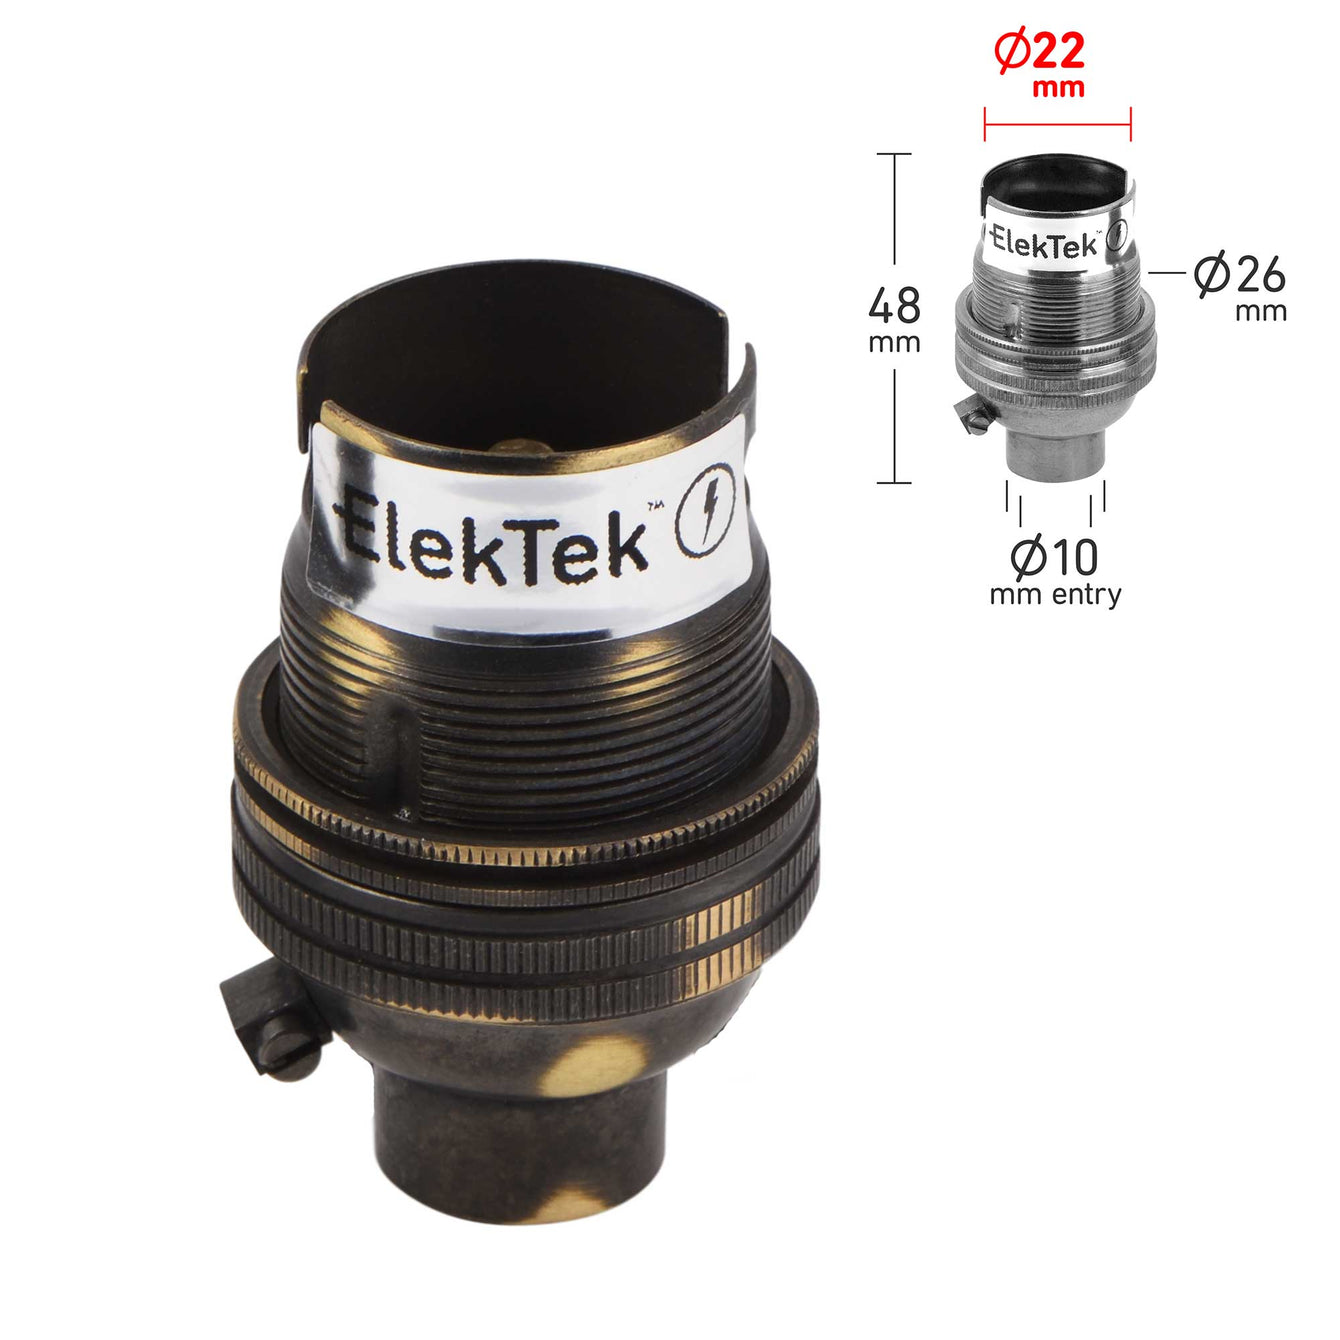 ElekTek Lamp Holder Bayonet Cap B22 Unswitched 10mm or Half Inch Entry With Shade Ring Solid Brass - Buy It Better Bronze / Half Inch